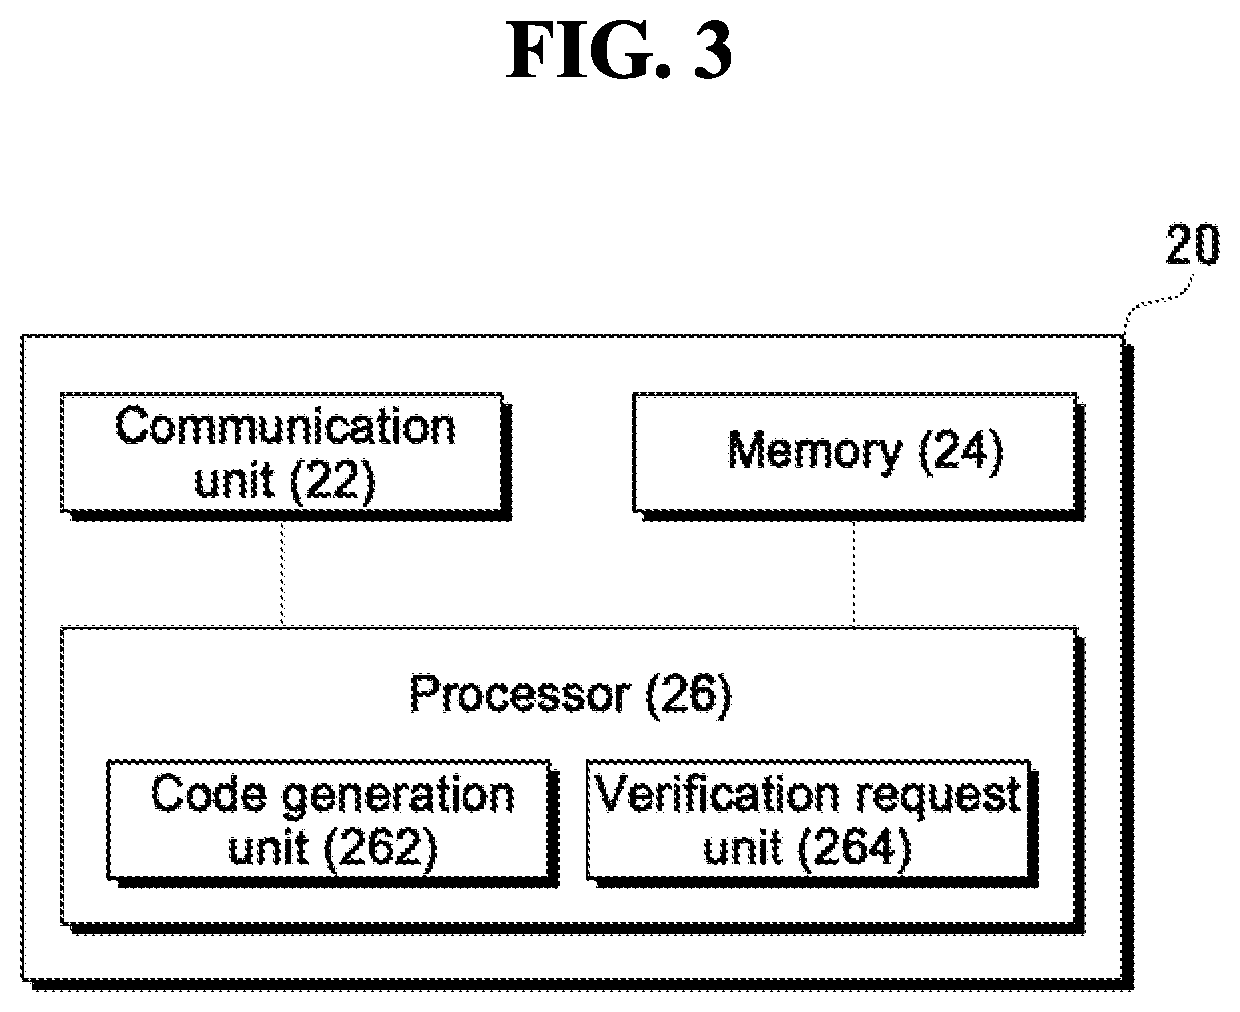 Smart card device, device for generating virtual code for authentication, method of generating virtual code for authentication using the same, and server for verifying virtual code for authentication